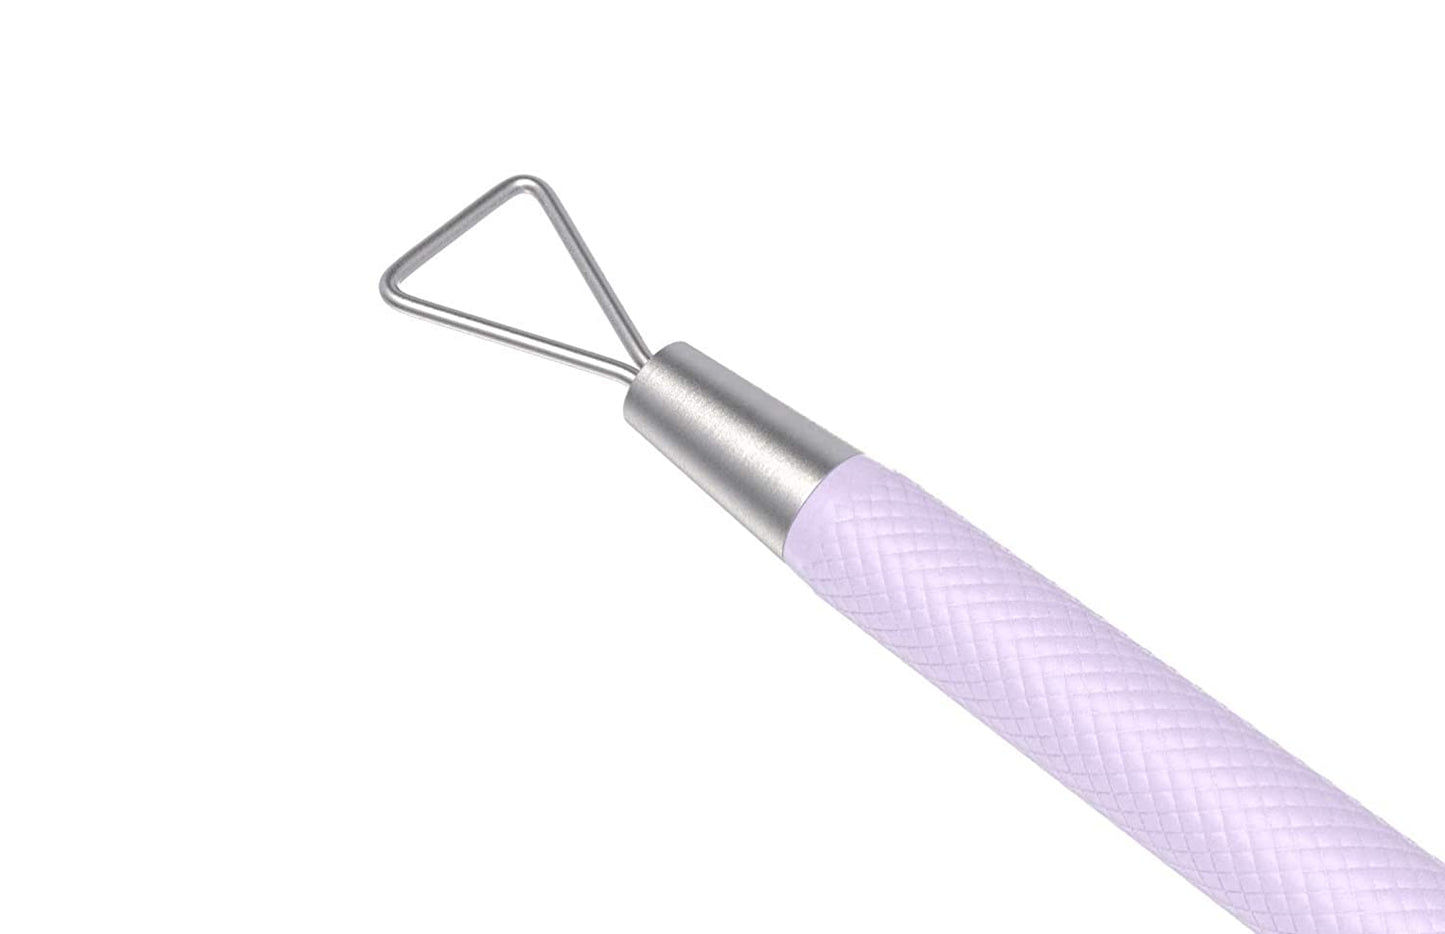 Gel Nail Polish Remover & Triangle Cuticle Pusher